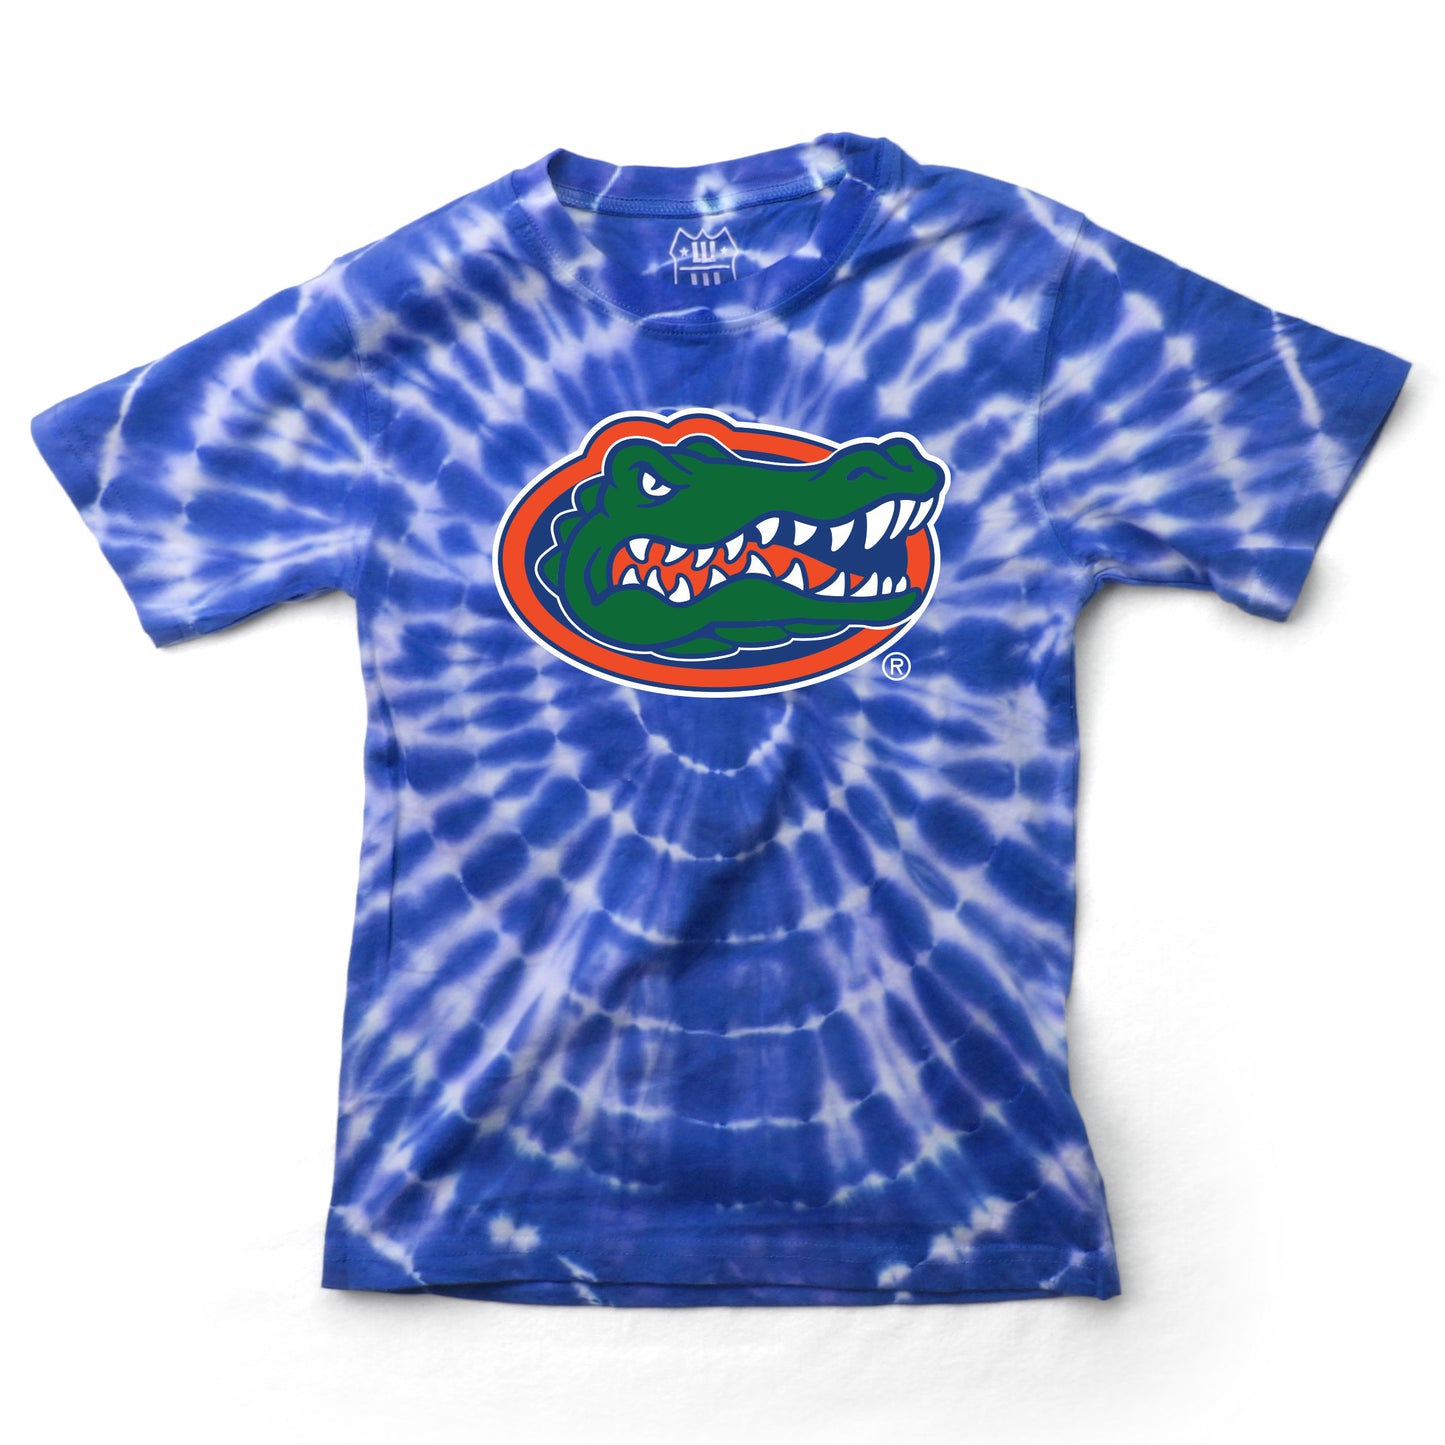 Florida Gators Wes and Willy Youth College Team Tie Dye T-Shirt